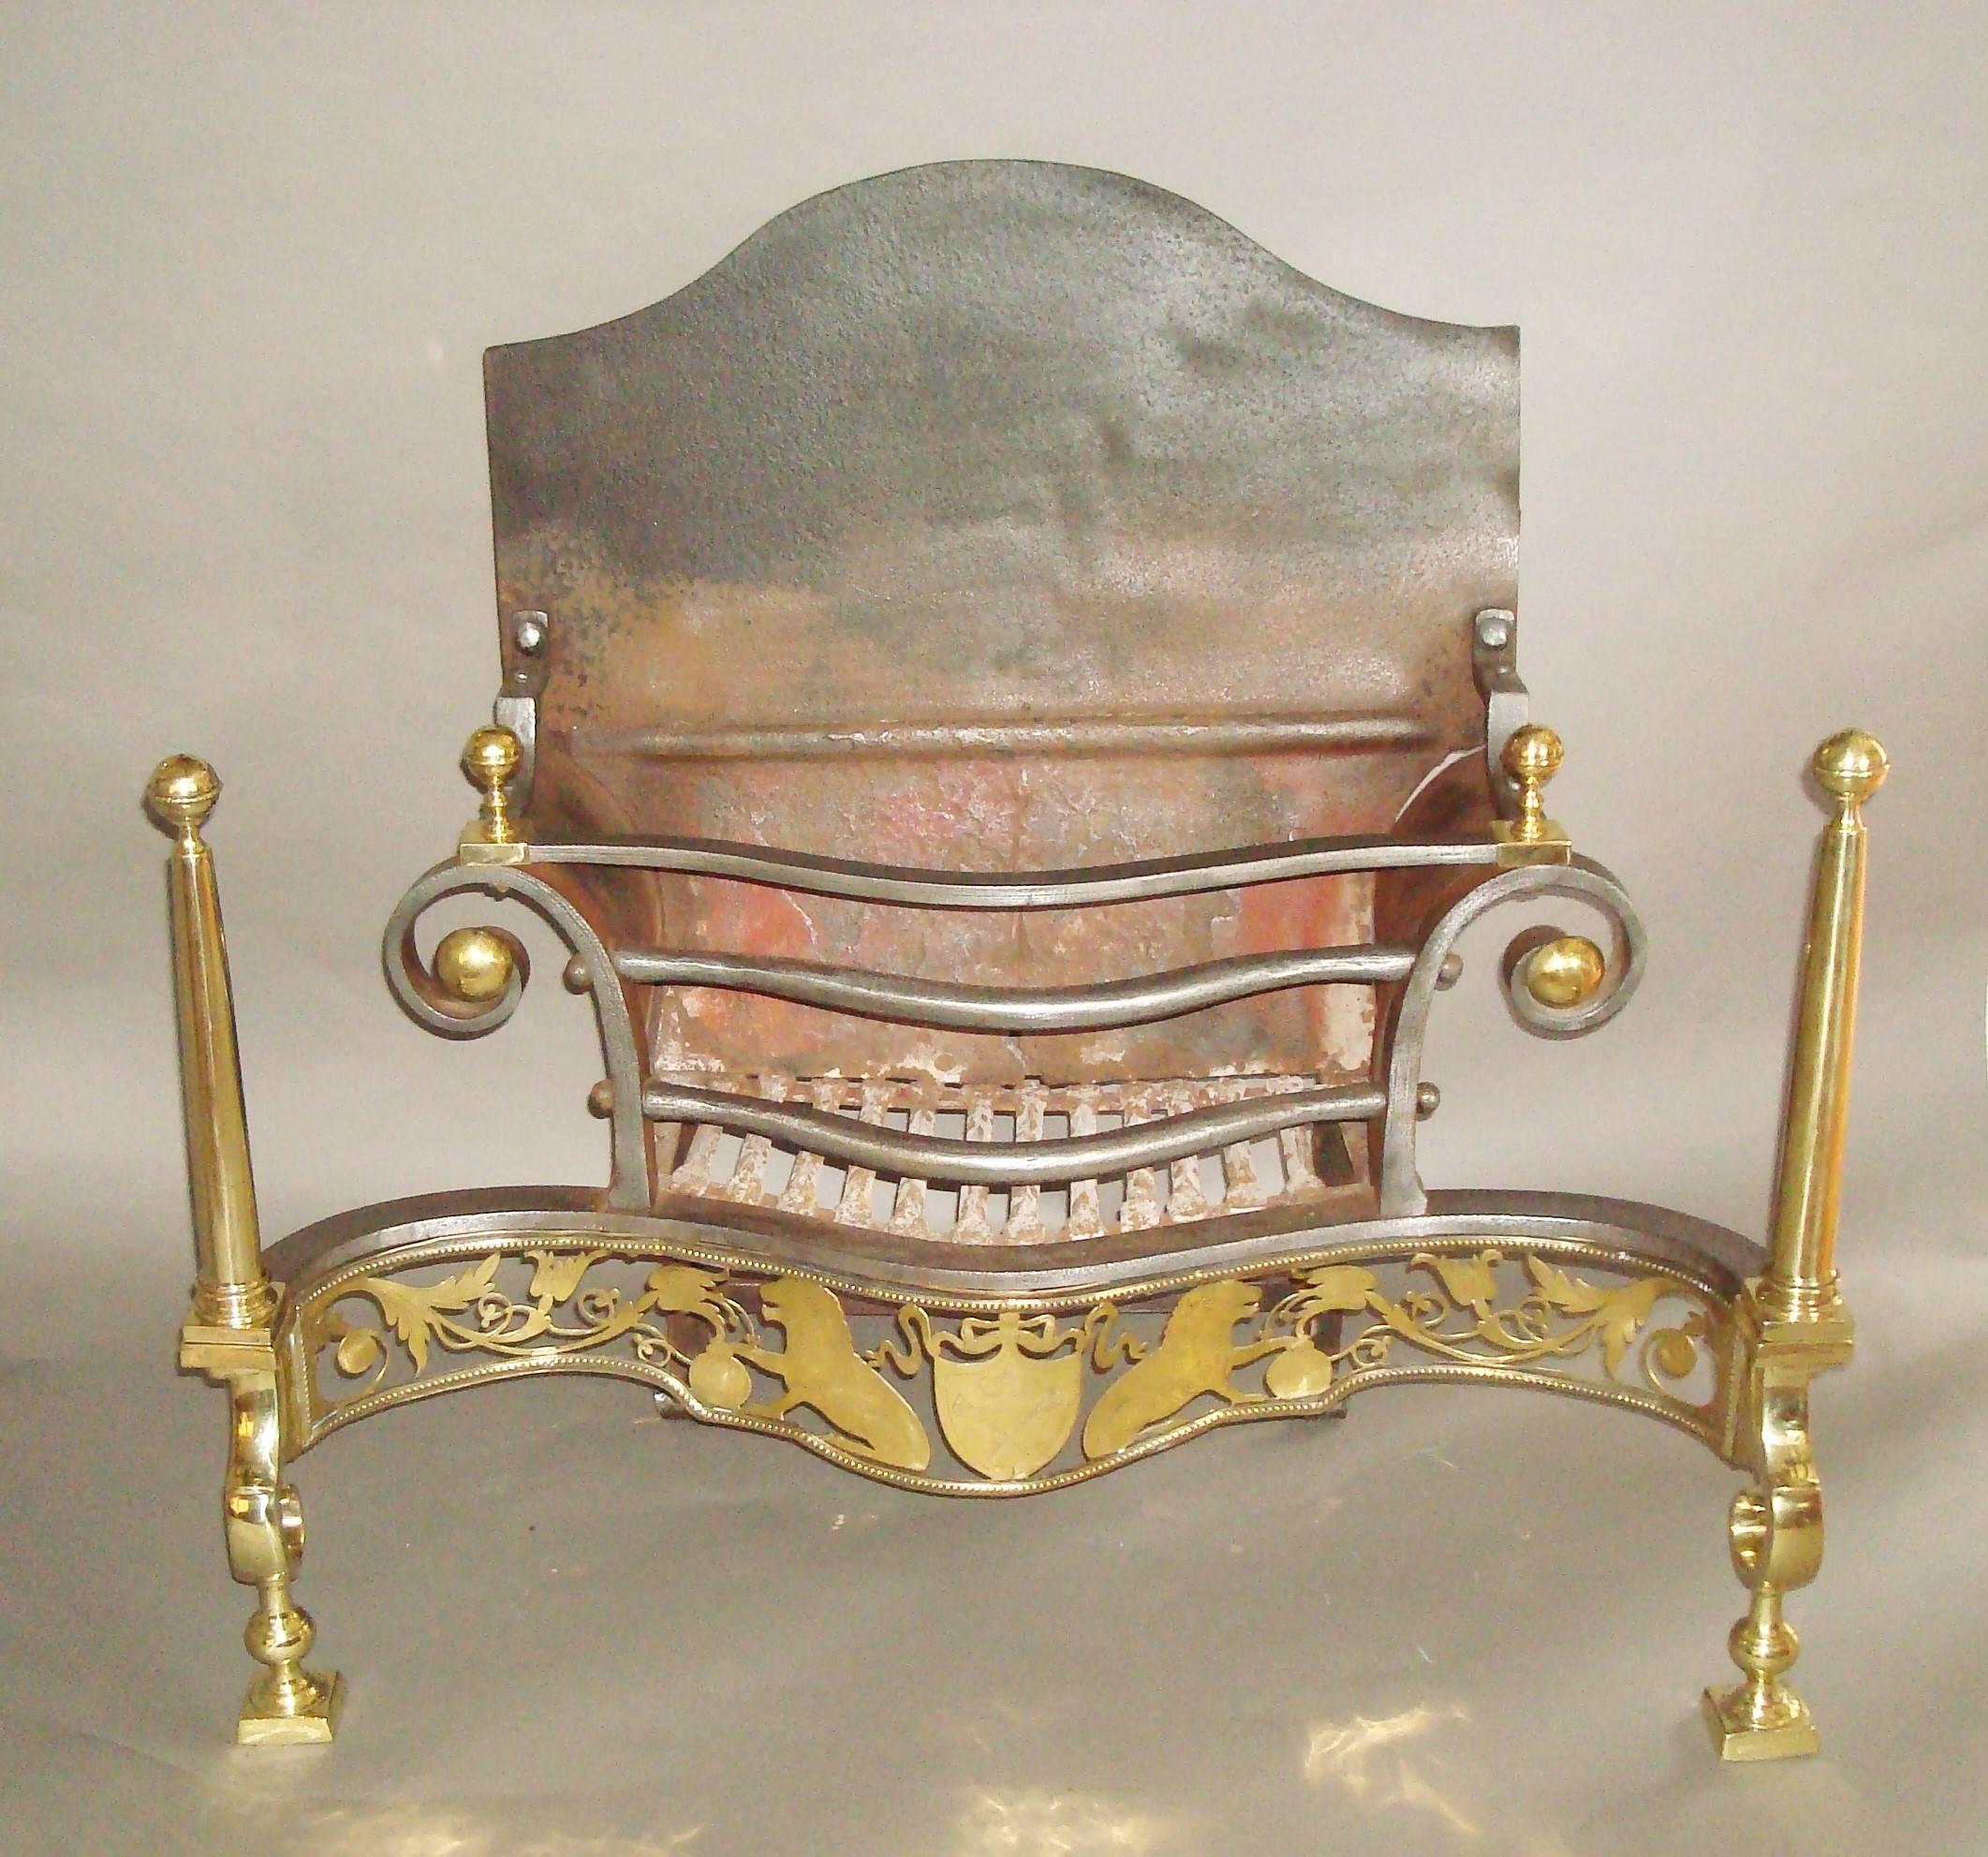 An exceptional 19th century large fire grate of neoclassical design in polished brass and burnished iron; the iron fireback having a serpentine shaped top with shaped sides to the basket. The front with serpentine bars, the top bar with scrolled